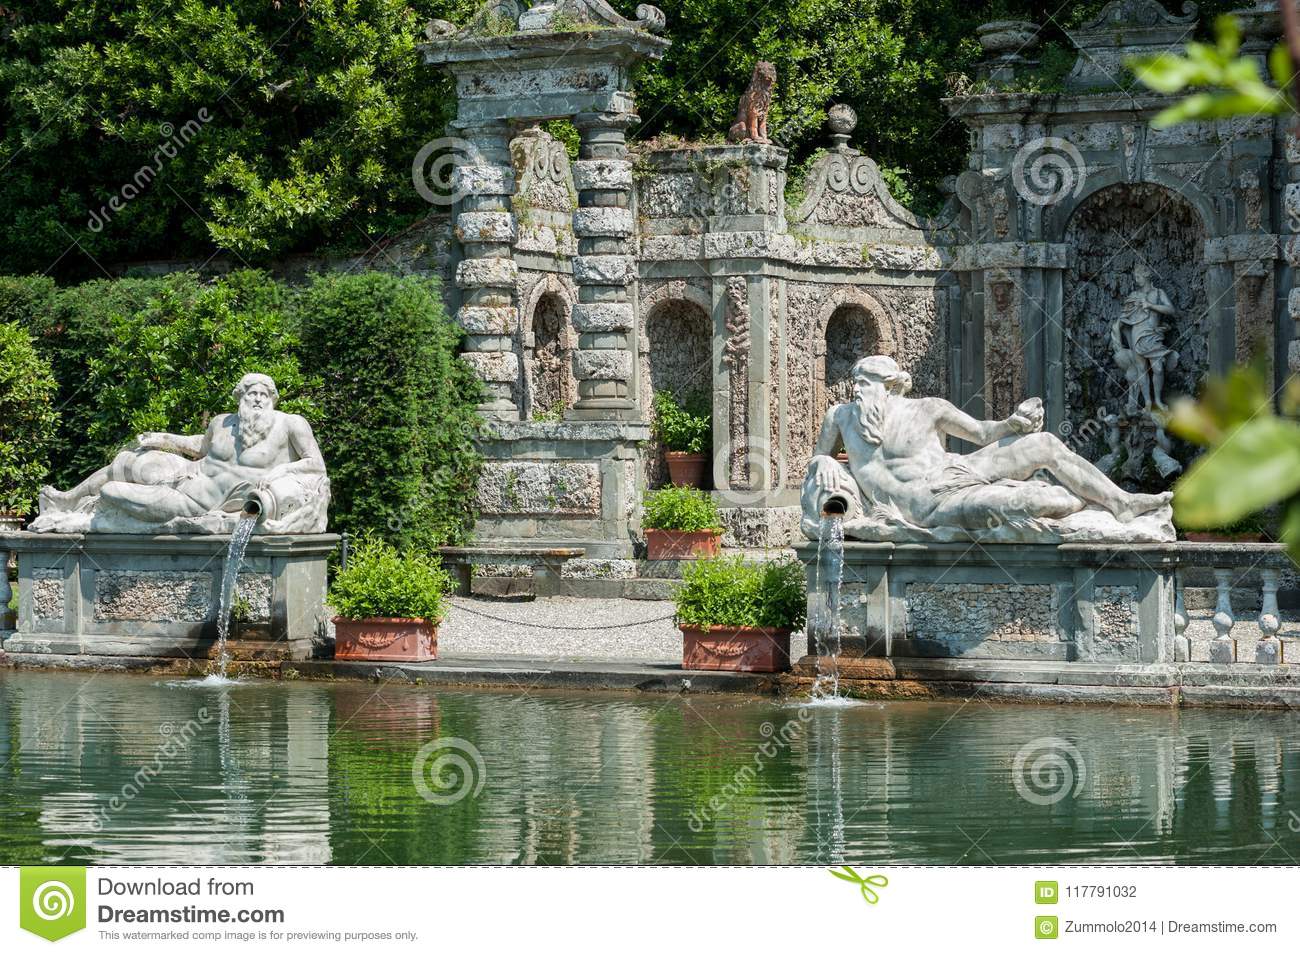 marlia lucca italy may lemon garden large ornamental pool stone balustrade two statues giants representing